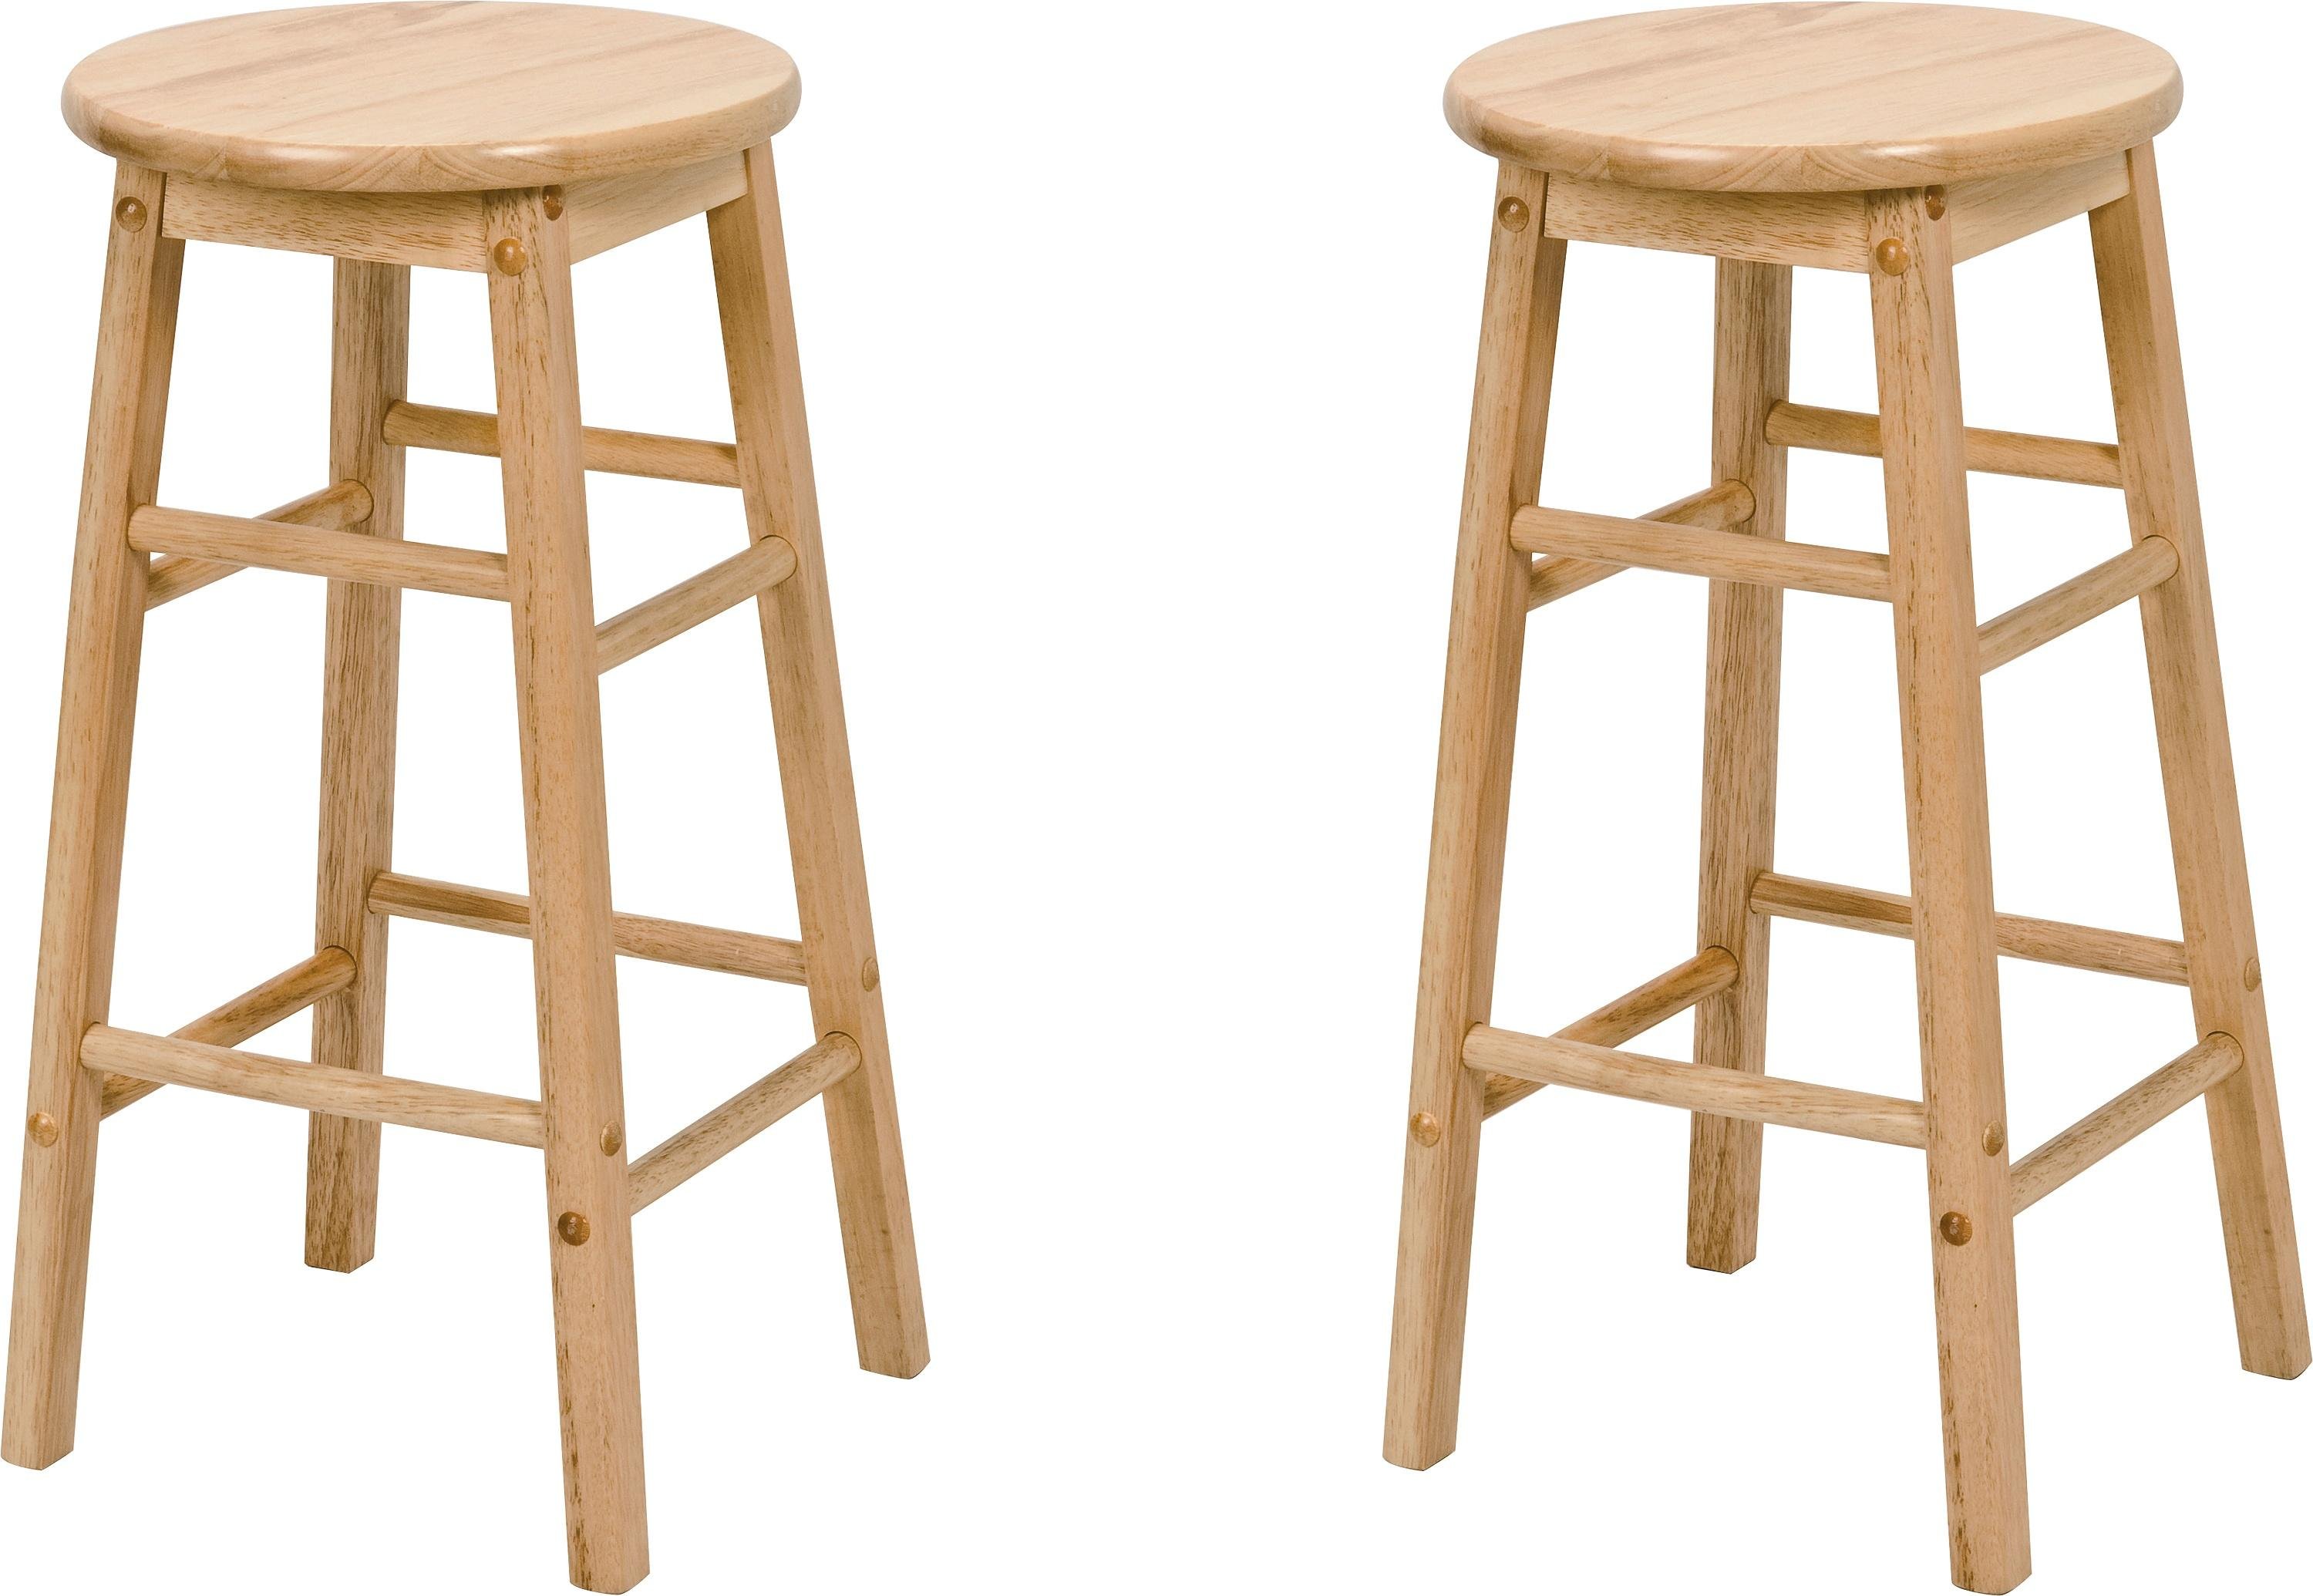 Argos Home Pair of Solid Wood Kitchen Stools Review